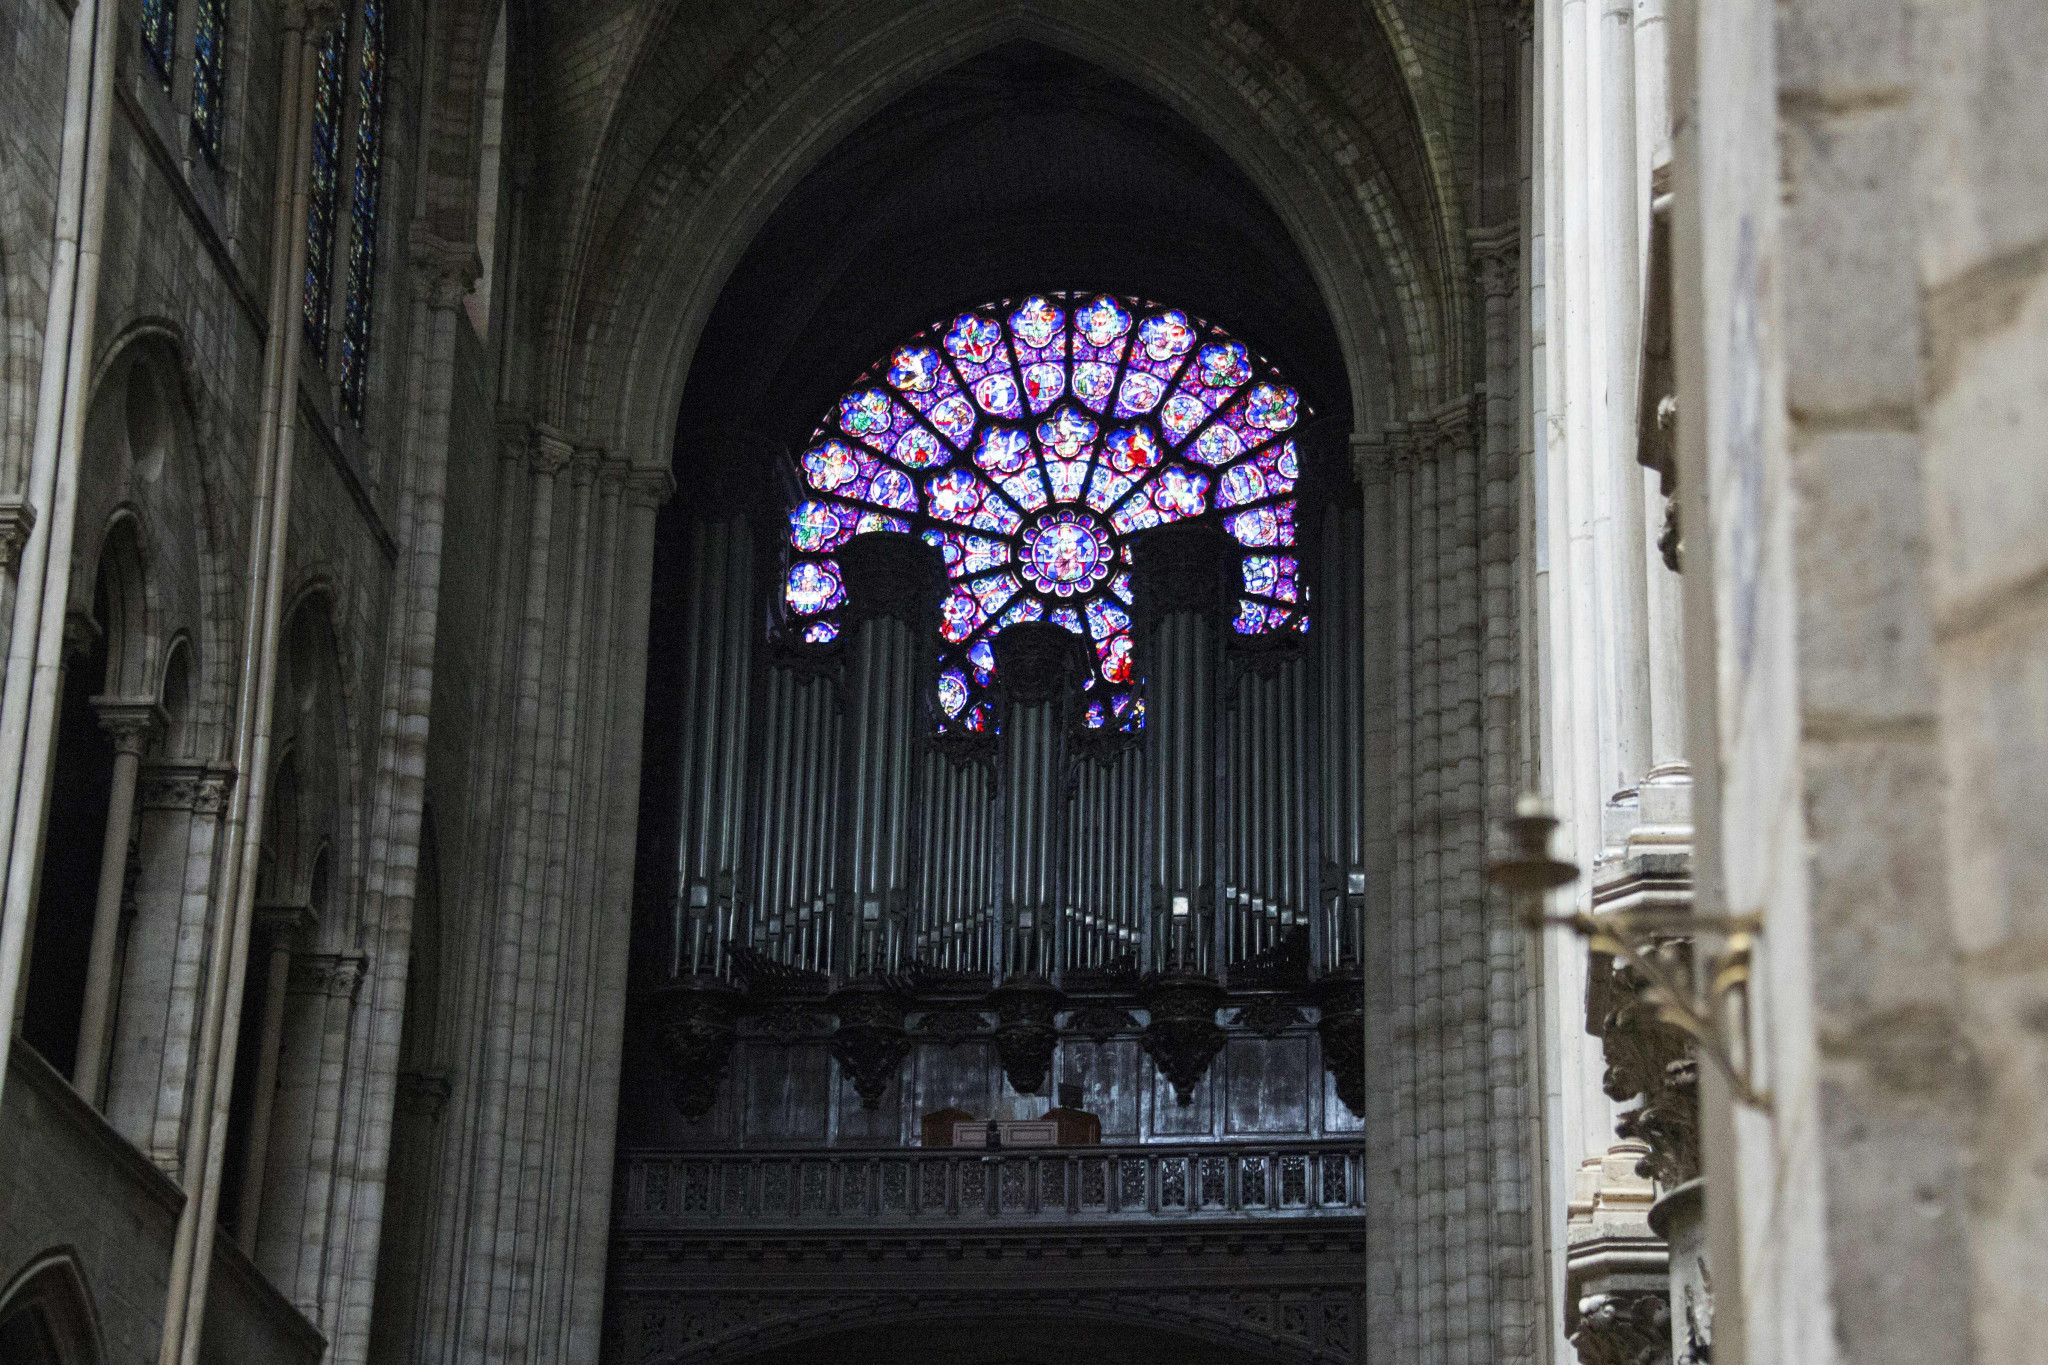 Work has begun on restoring the famous organ at Notre-Dame cathedral to full capacity by the time of Paris 2024 ©Getty Images